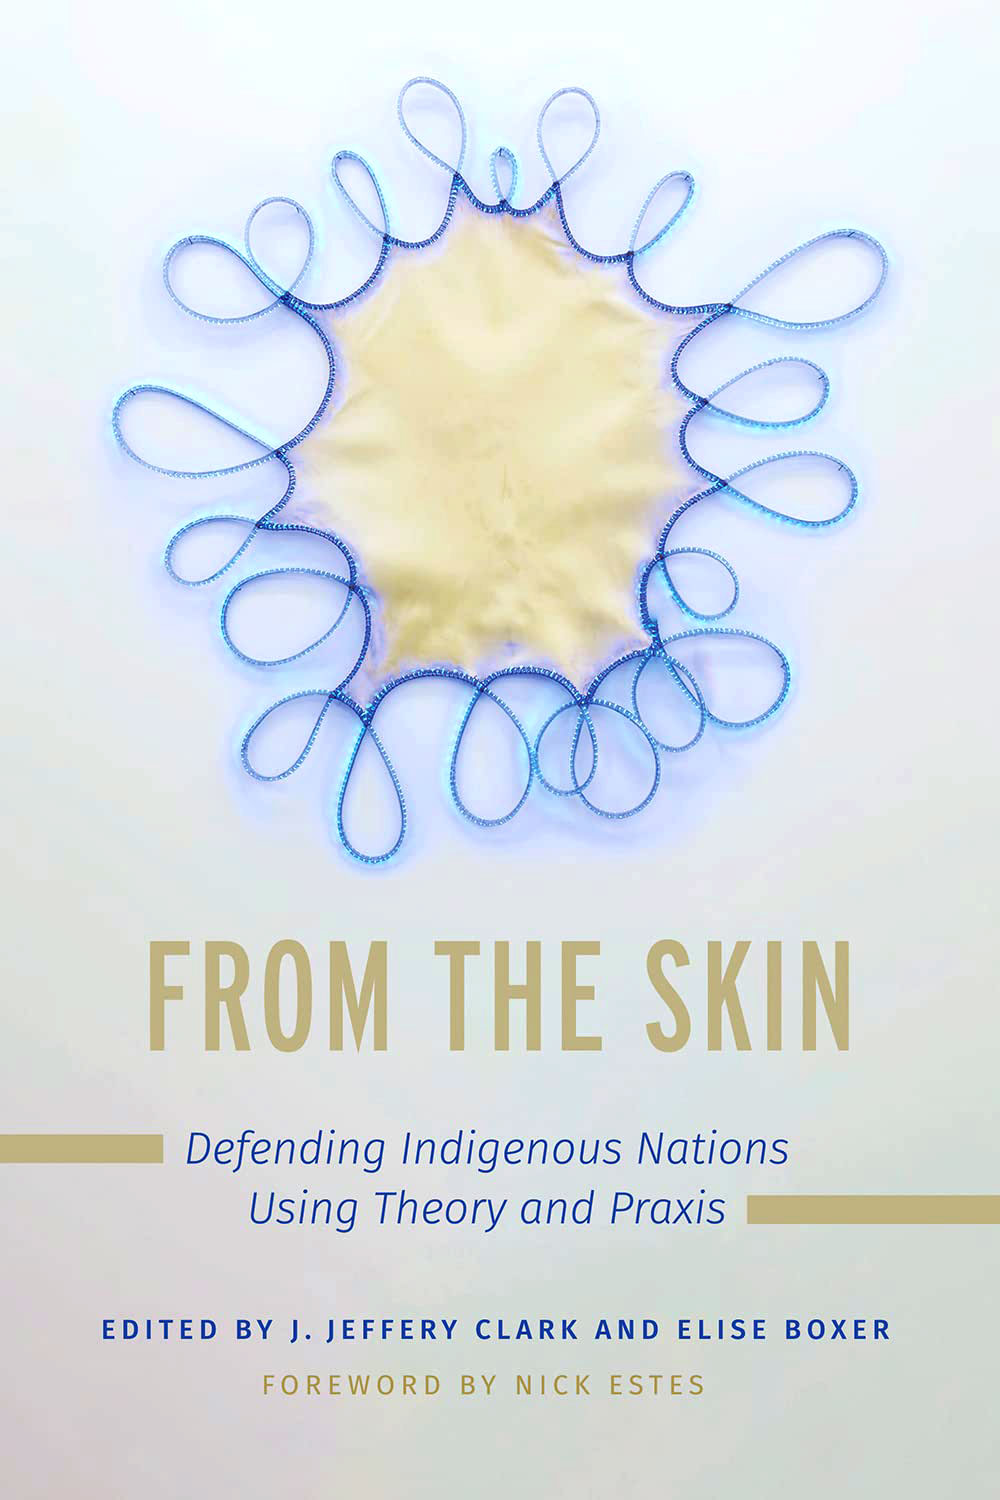 From the Skin: Defending Indigenous Nations Using Theory and Praxis edited by J. Jeffery Clark & Elise Boxer